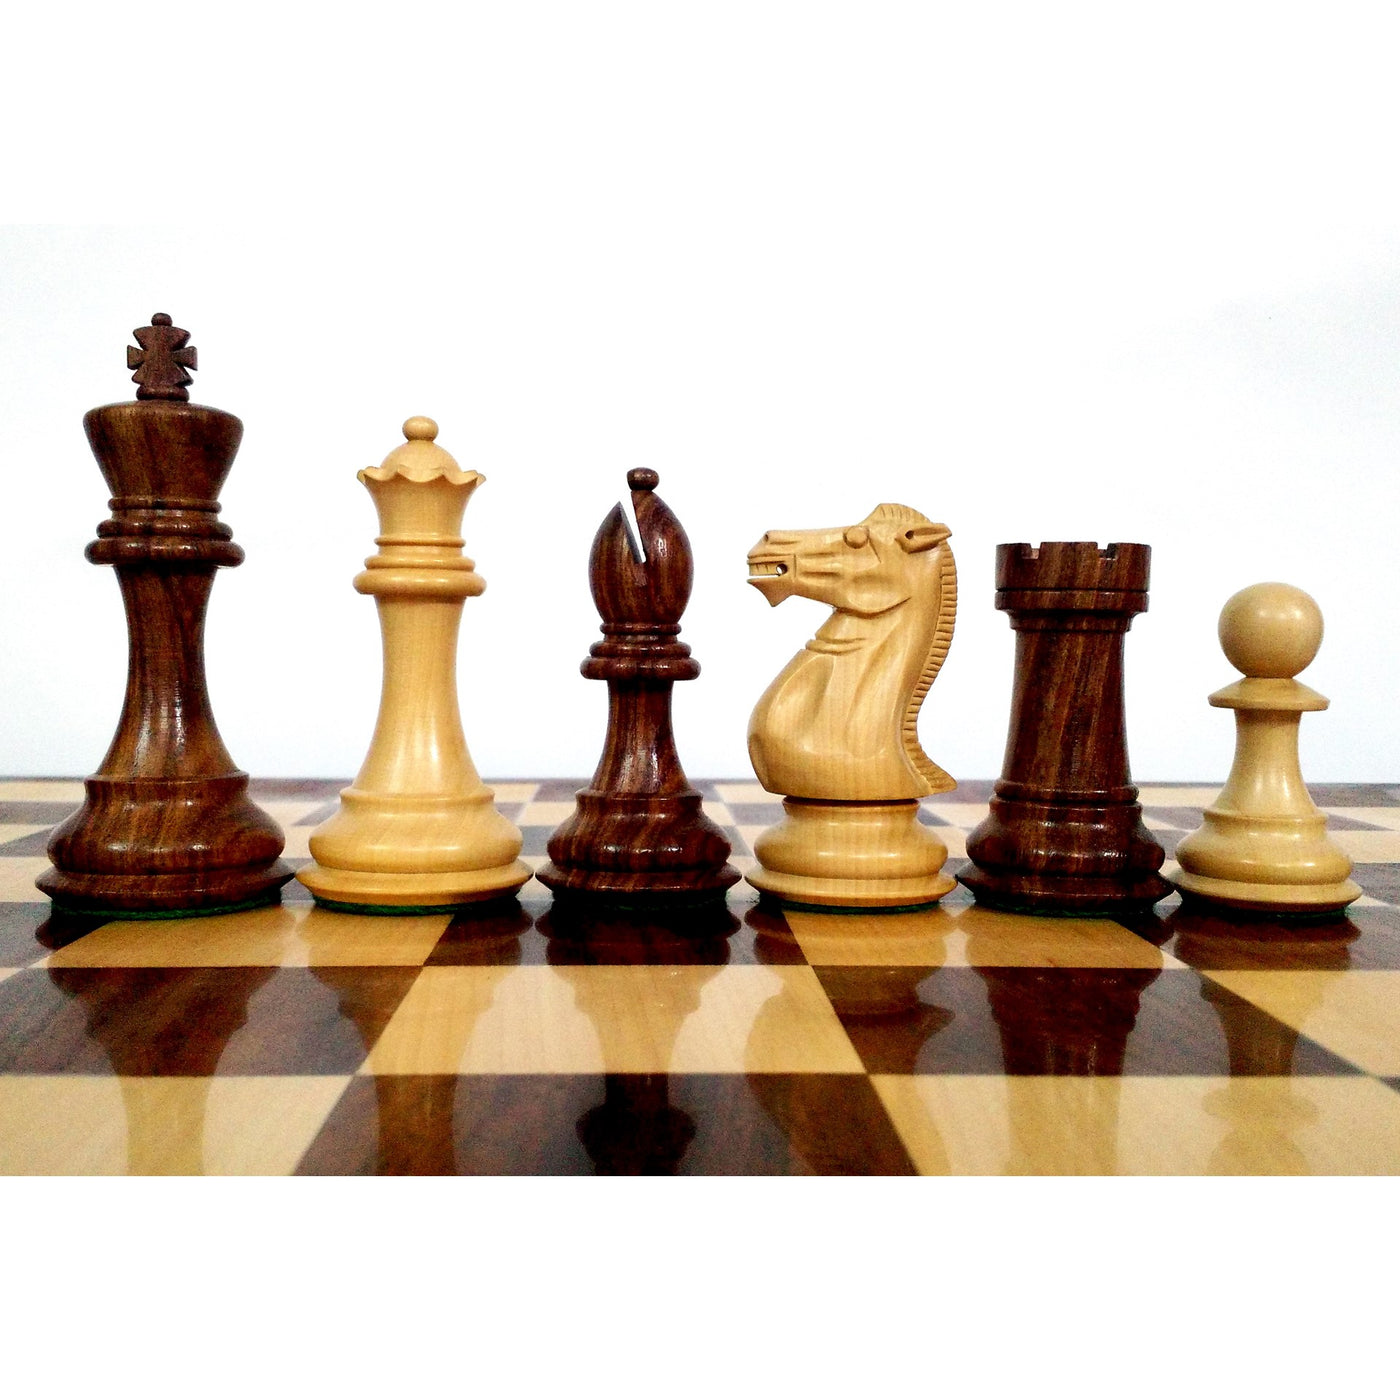 Slightly Imperfect 4.1" Pro Staunton Weighted Wooden Chess Pieces Only Set - Sheesham wood - 4 queens